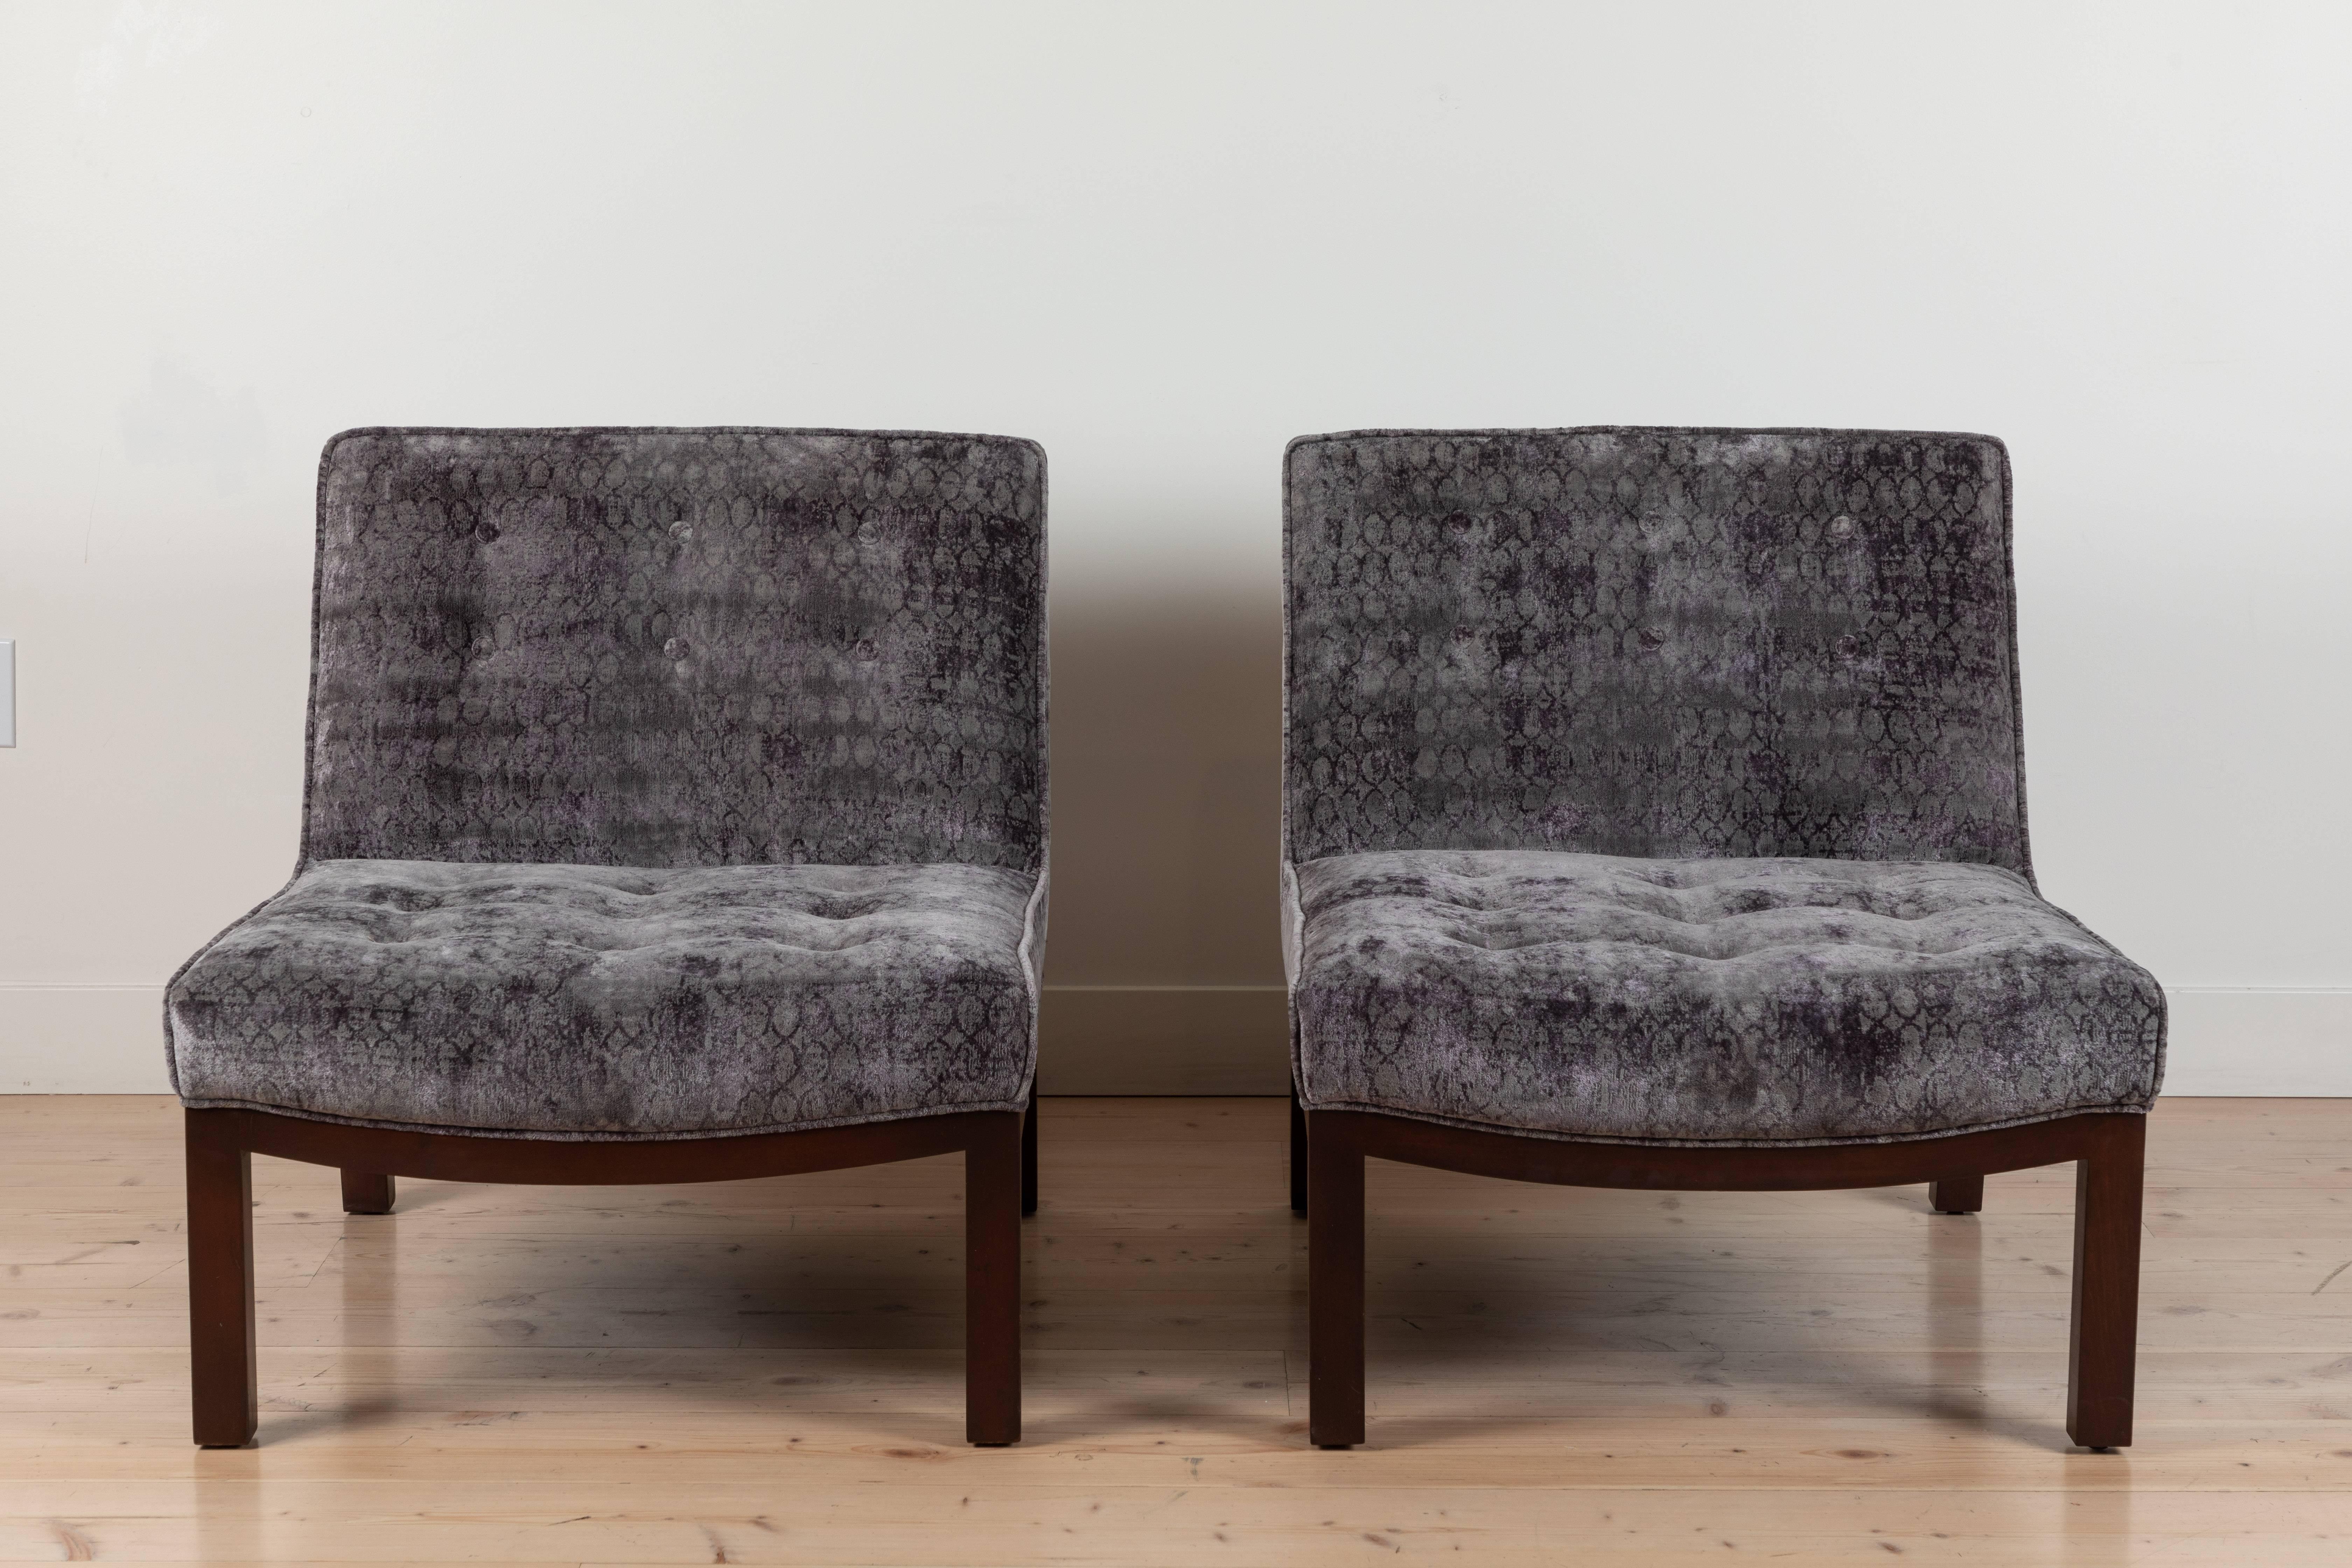 Pair of slipper chairs by Edward Wormley for Dunbar.